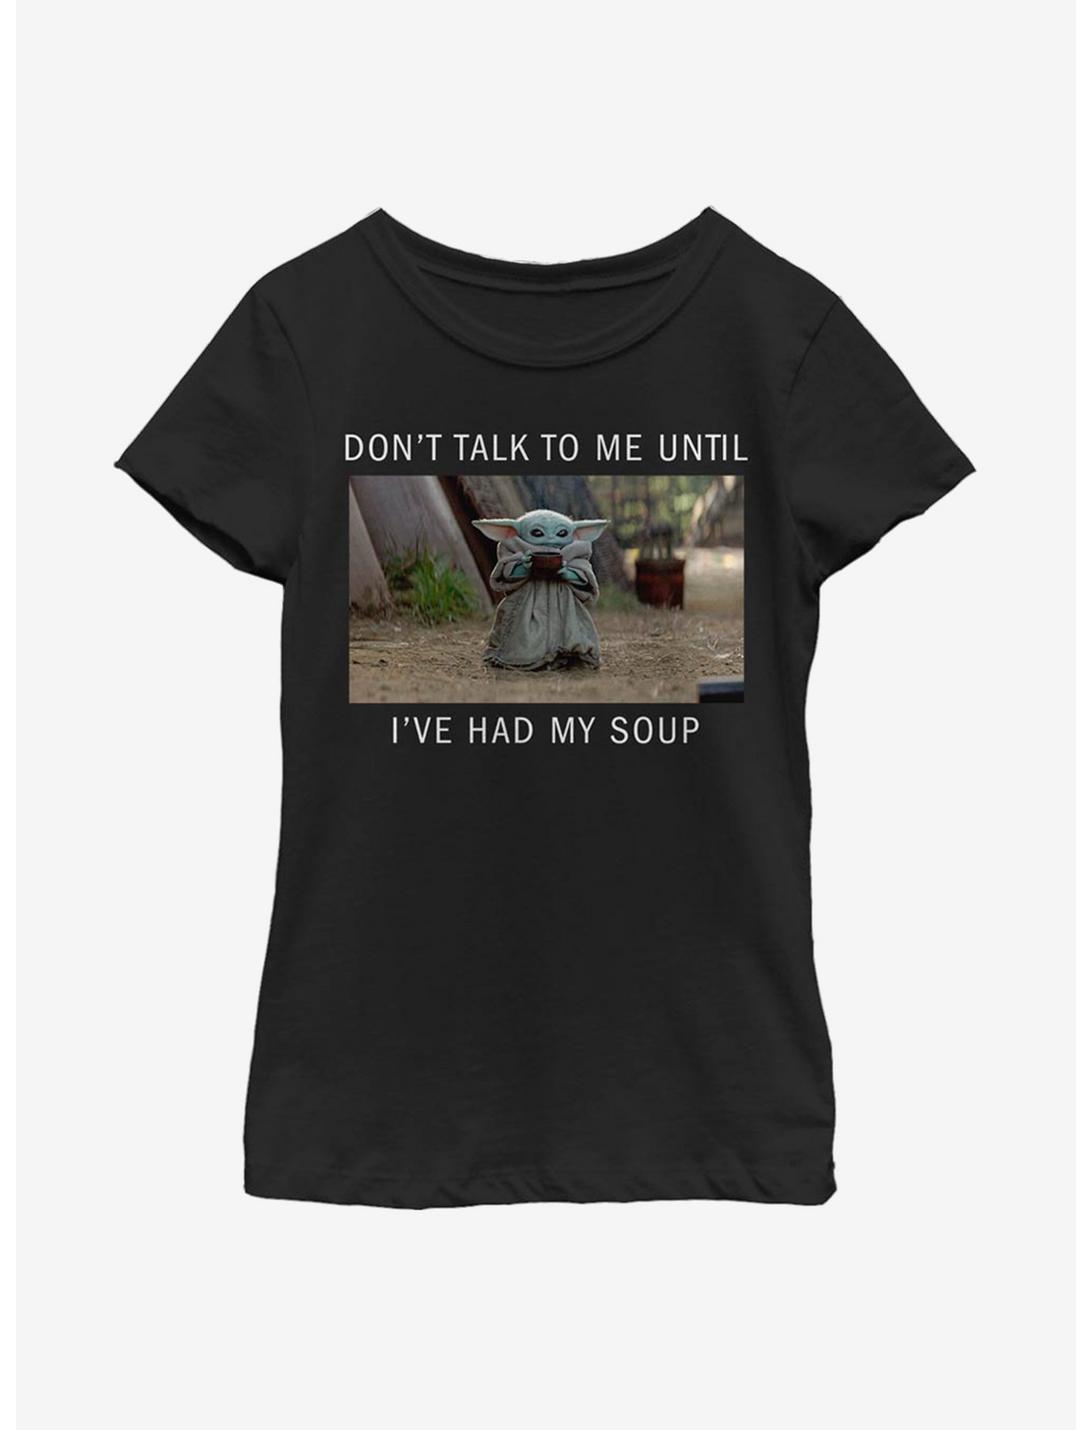 Star Wars The Mandalorian The Child Need Soup Youth Girls T-Shirt, BLACK, hi-res